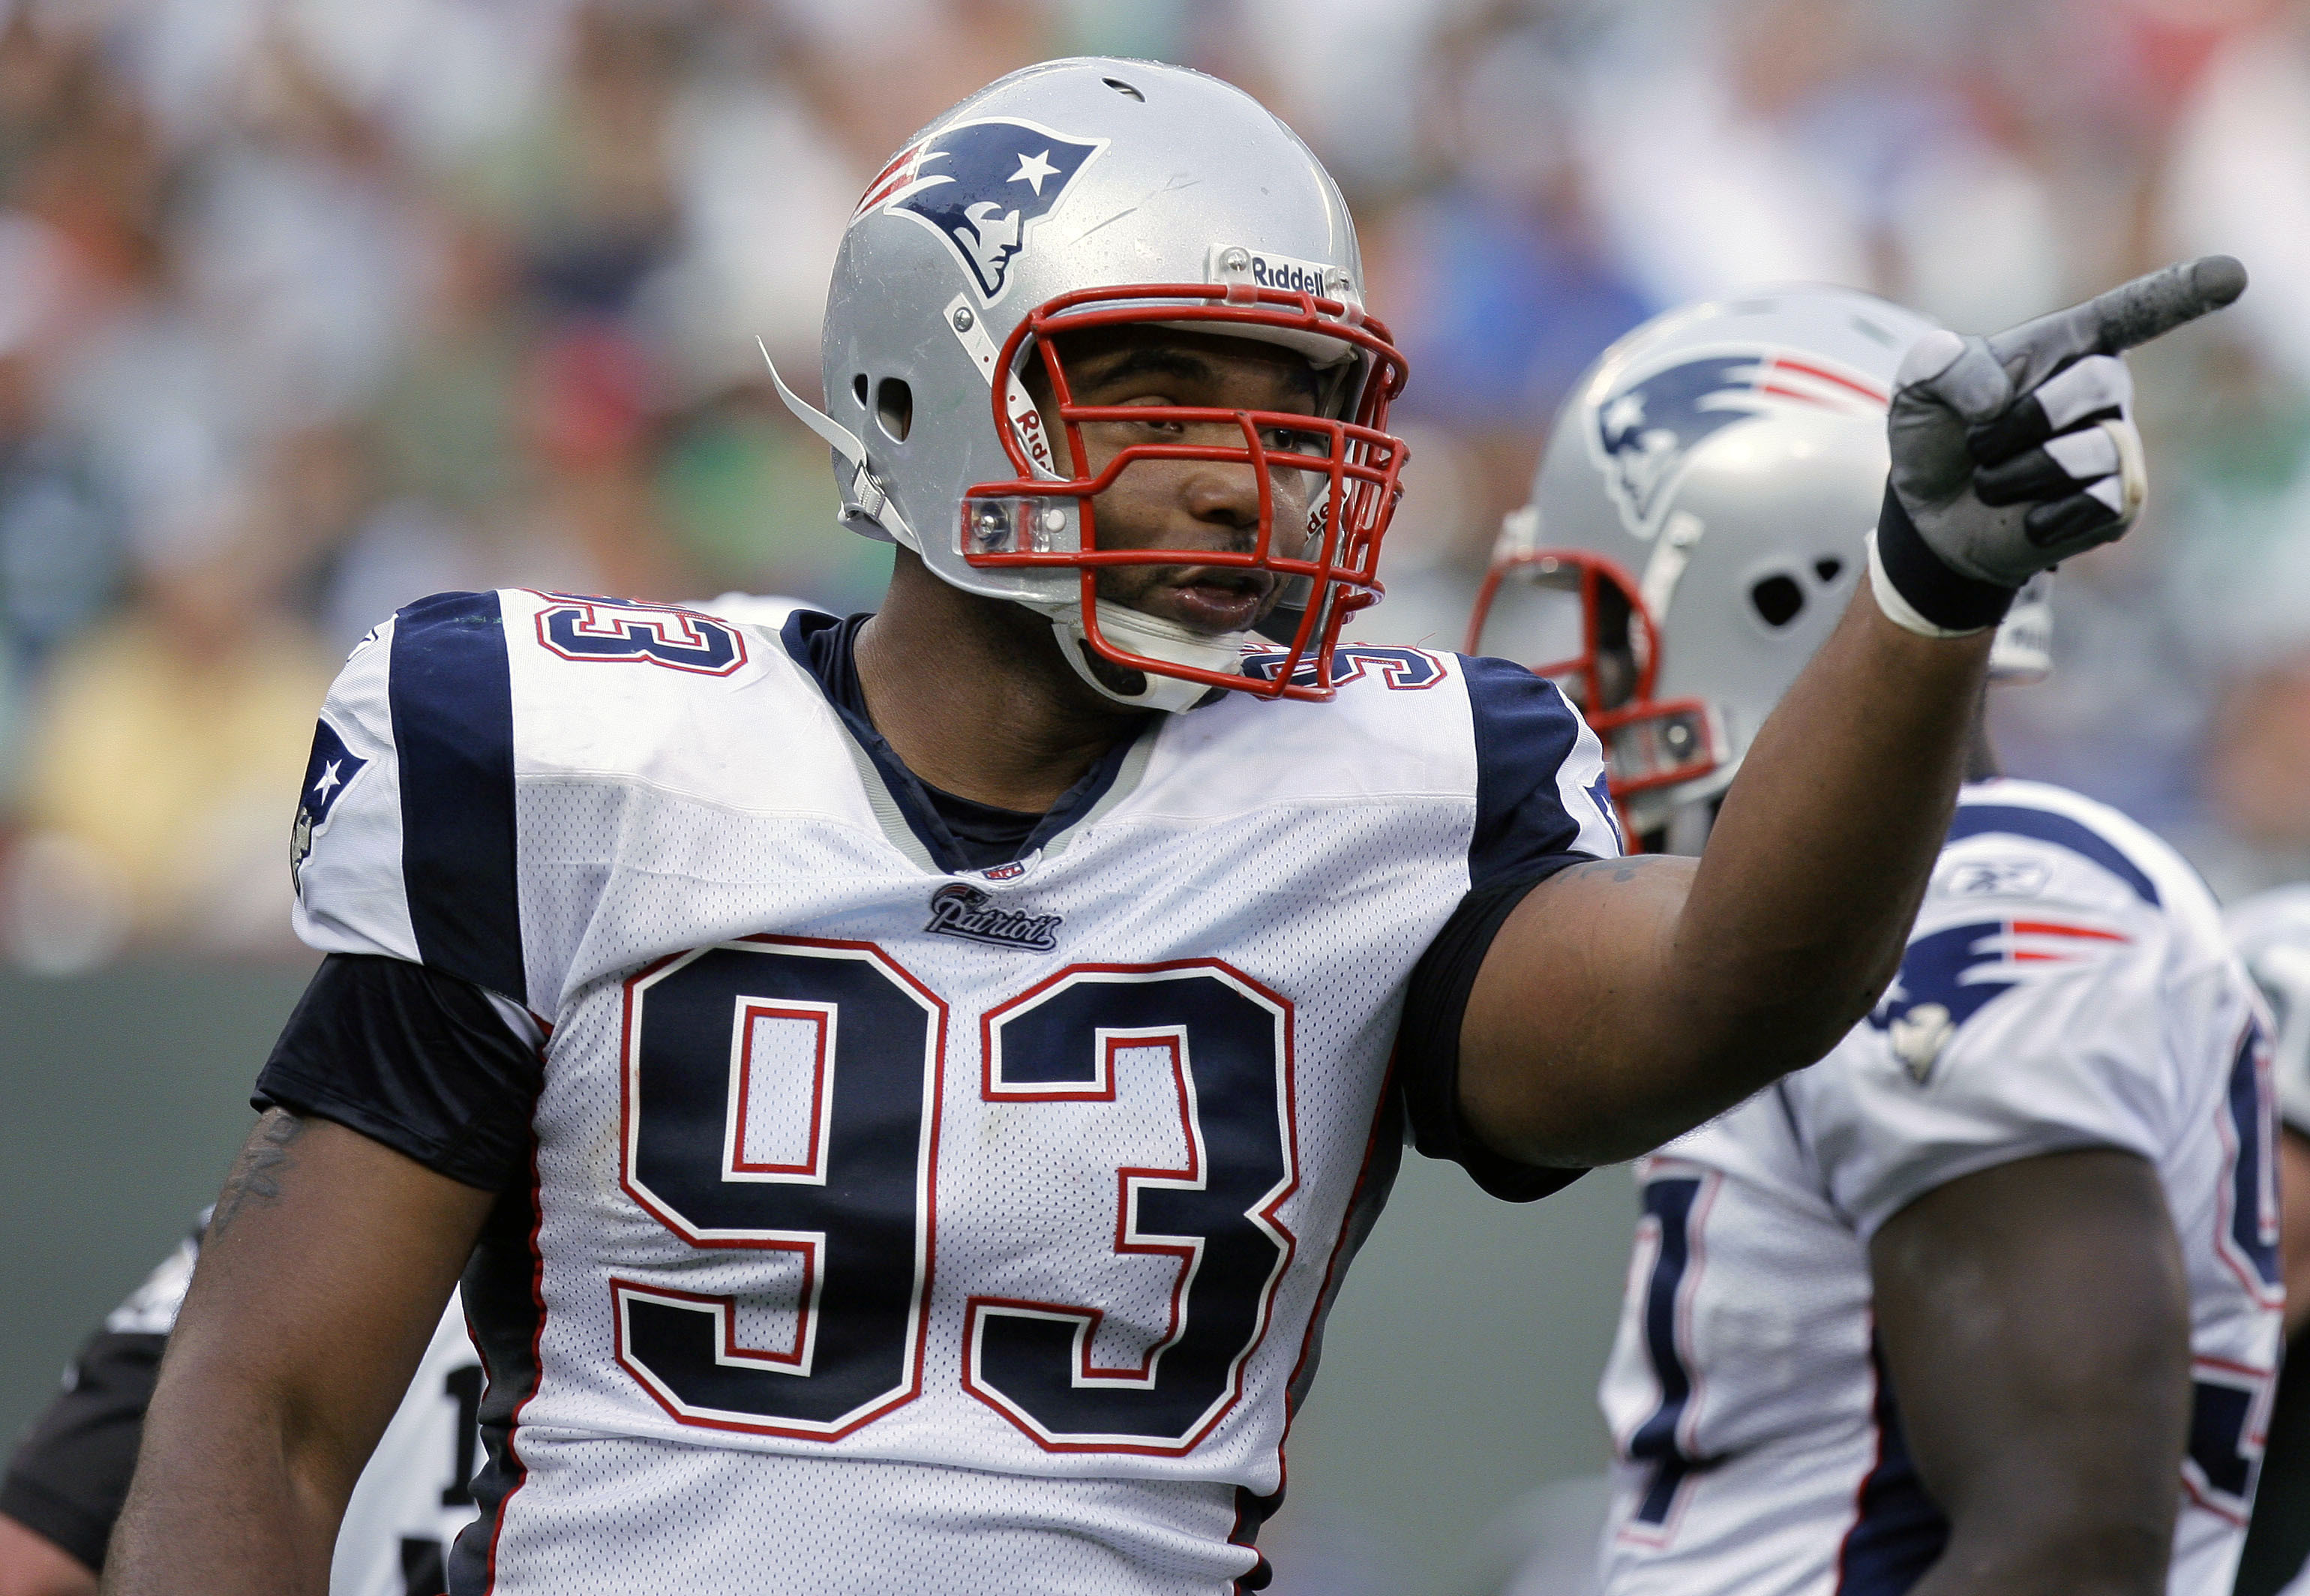 Former Patriots DE Richard Seymour does not get call to NFL's Hall of Fame  - The Boston Globe